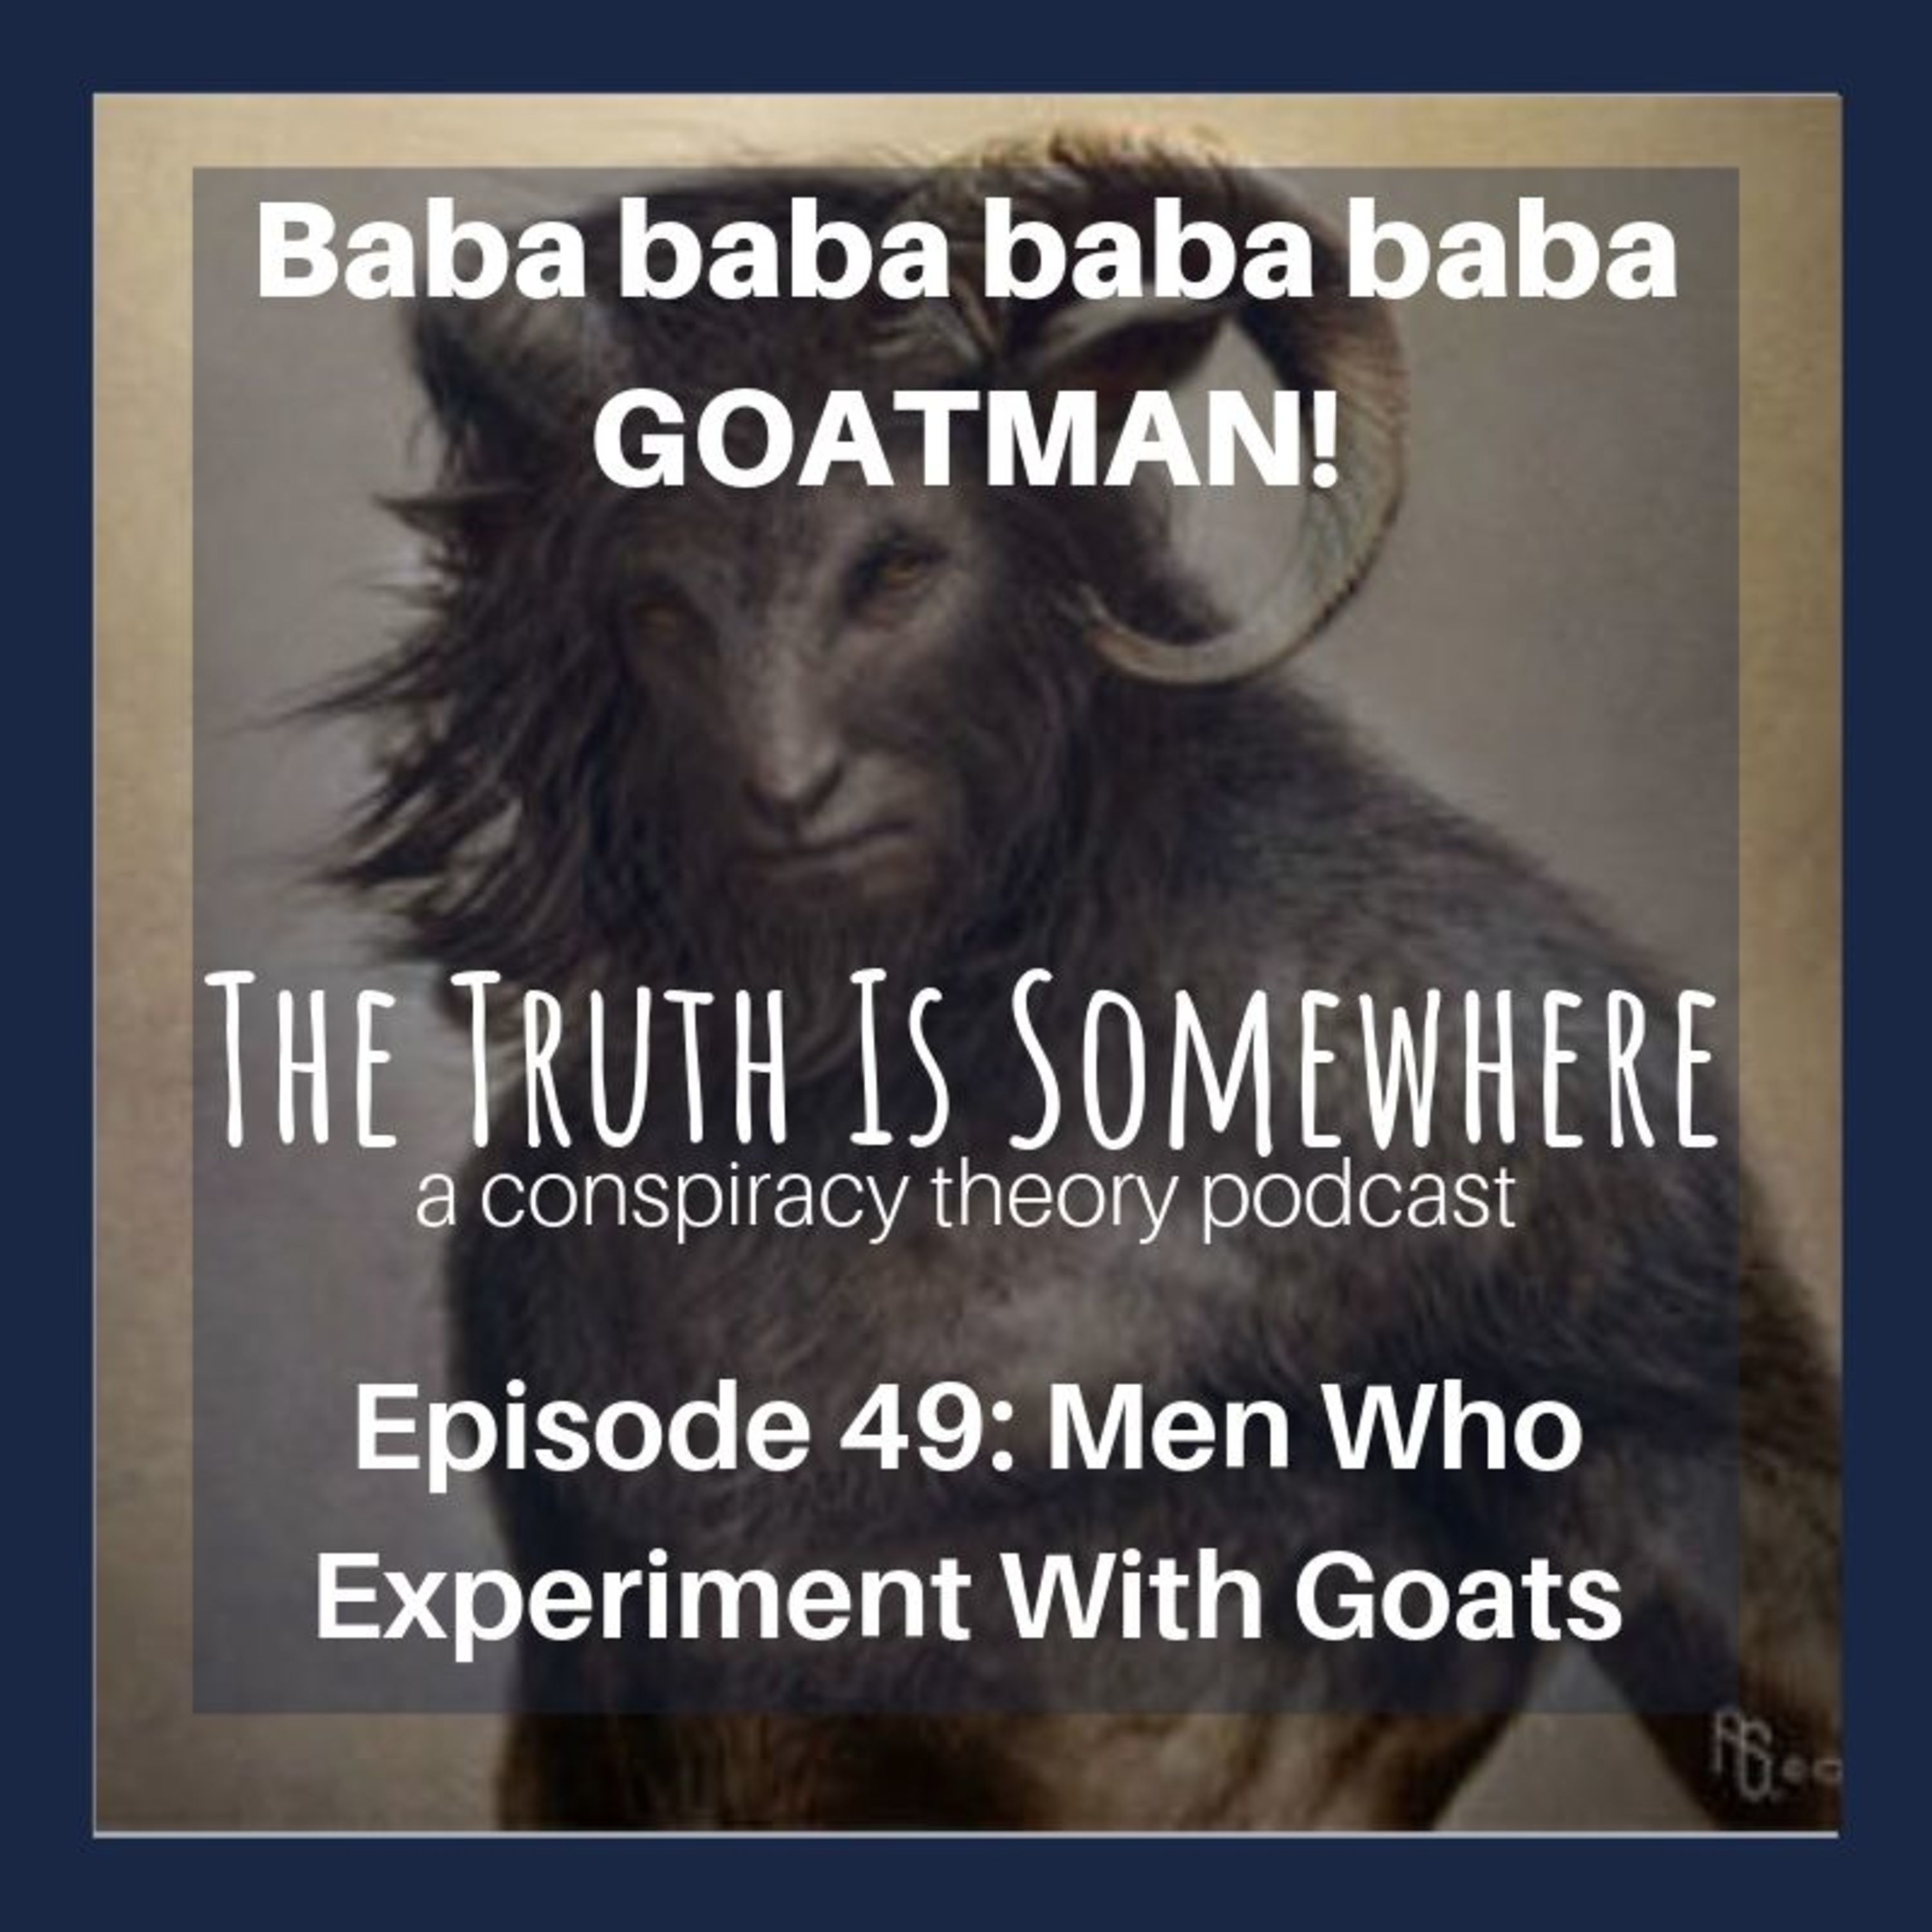 Men Who Experiment with Goats